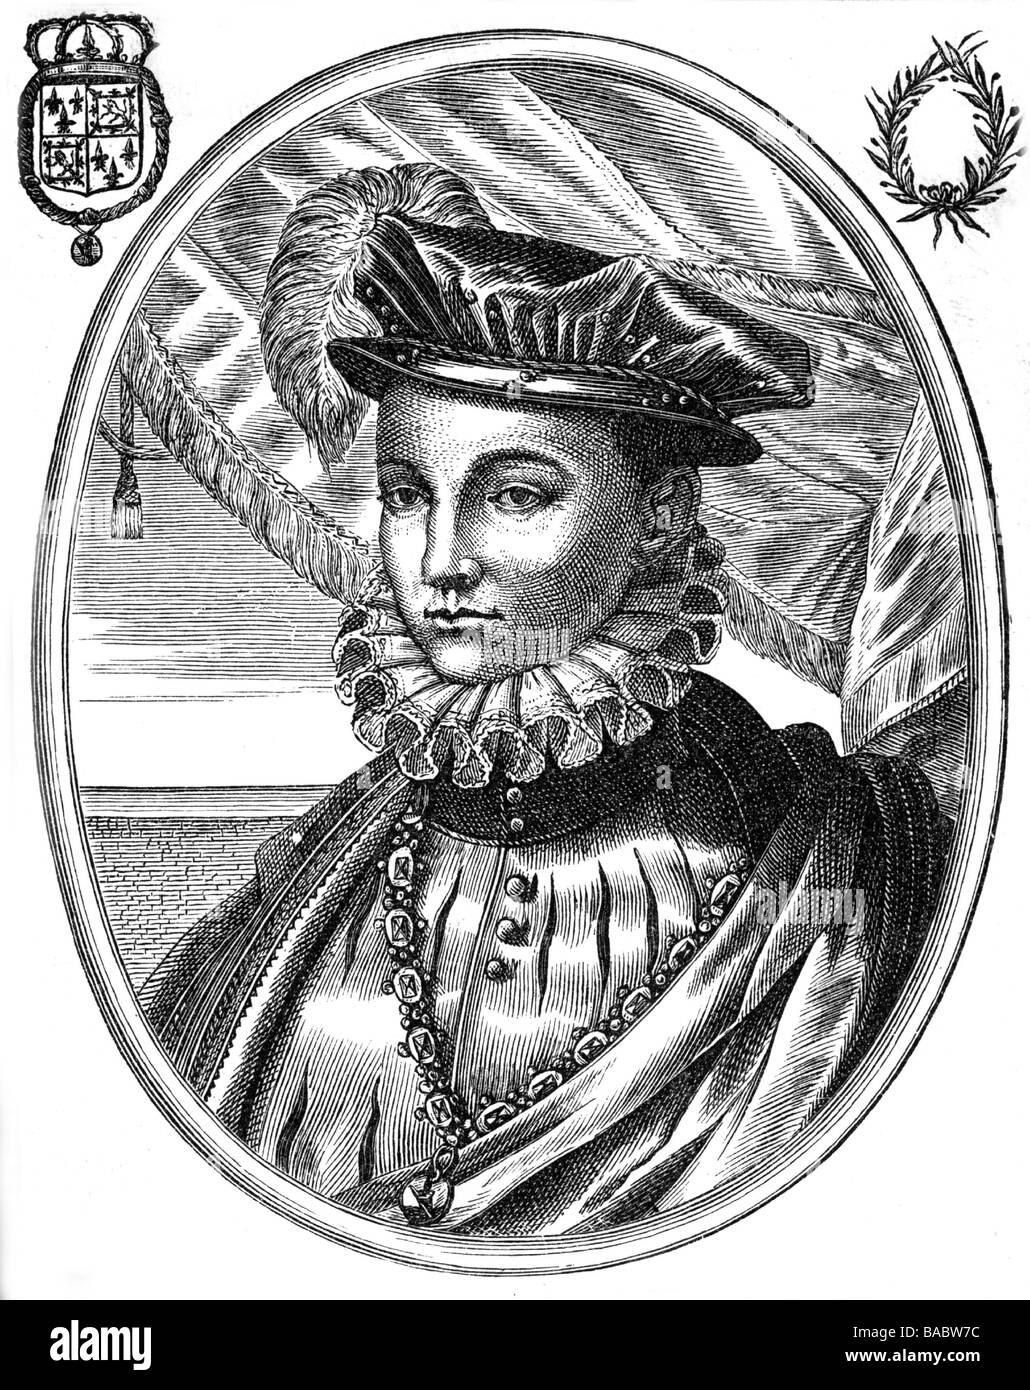 Francis II, 19.1.1544 - 5.12.1560, King of France since 10.7.1559, portrait, wood engraving, after copper engraving by Balthazar Moncornet (circa 1600 - 1668), Artist's Copyright has not to be cleared Stock Photo